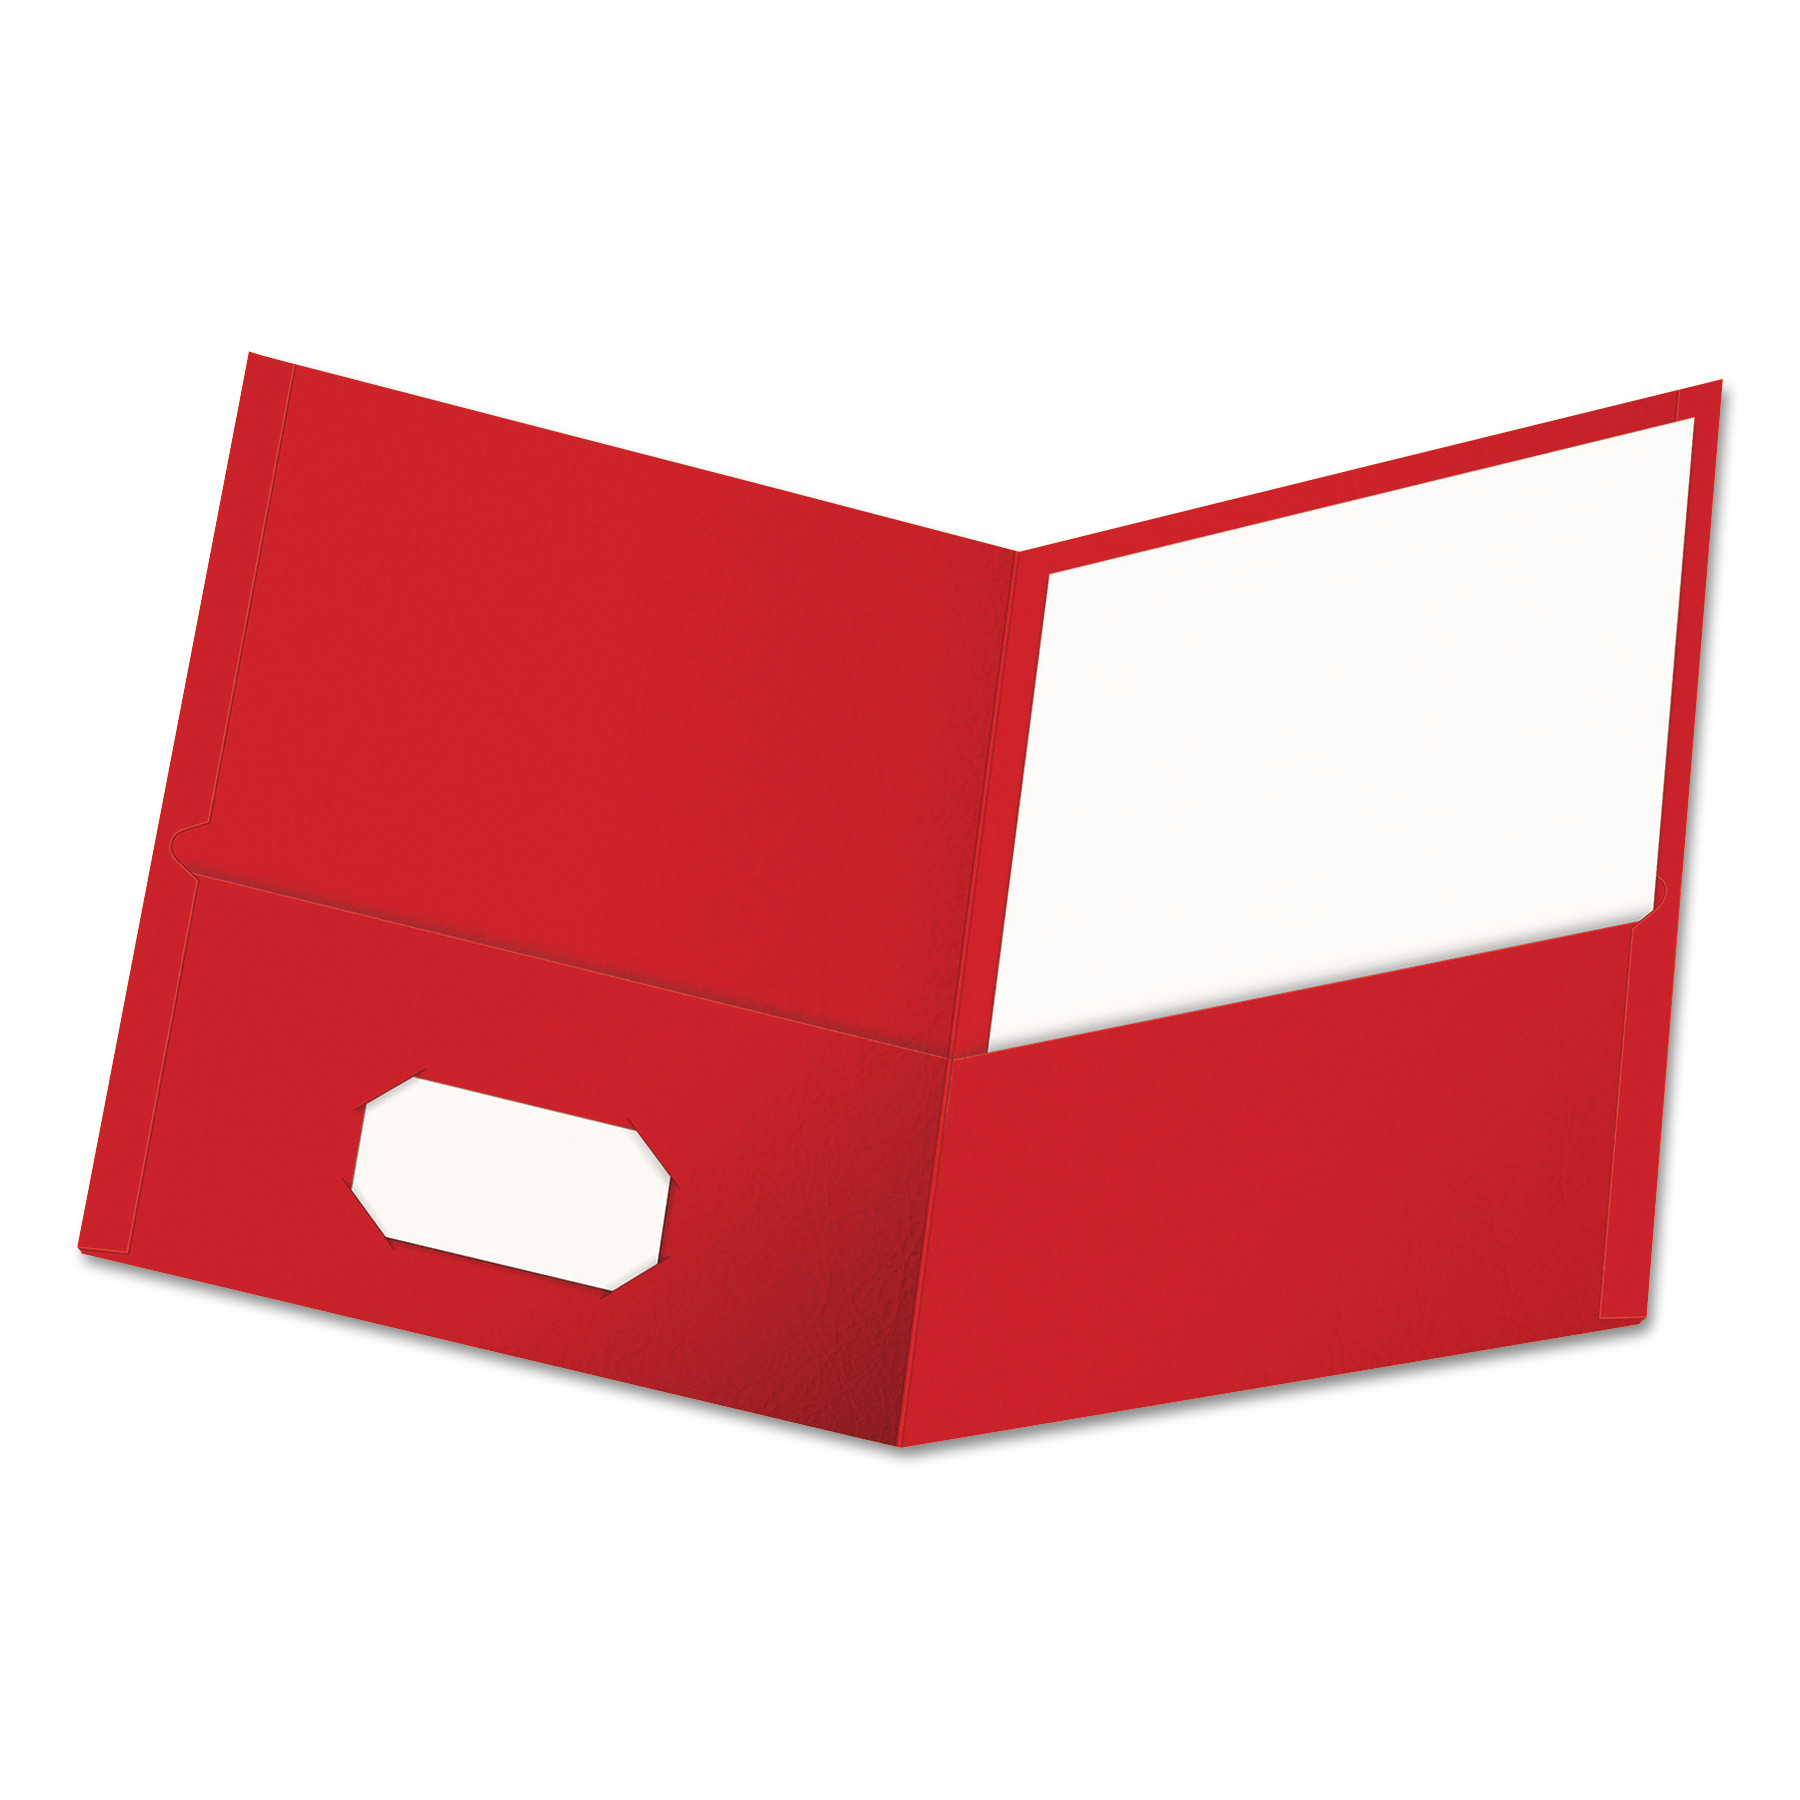 Two-Pocket Portfolio, Embossed Leather Grain Paper, Red, 25/Box